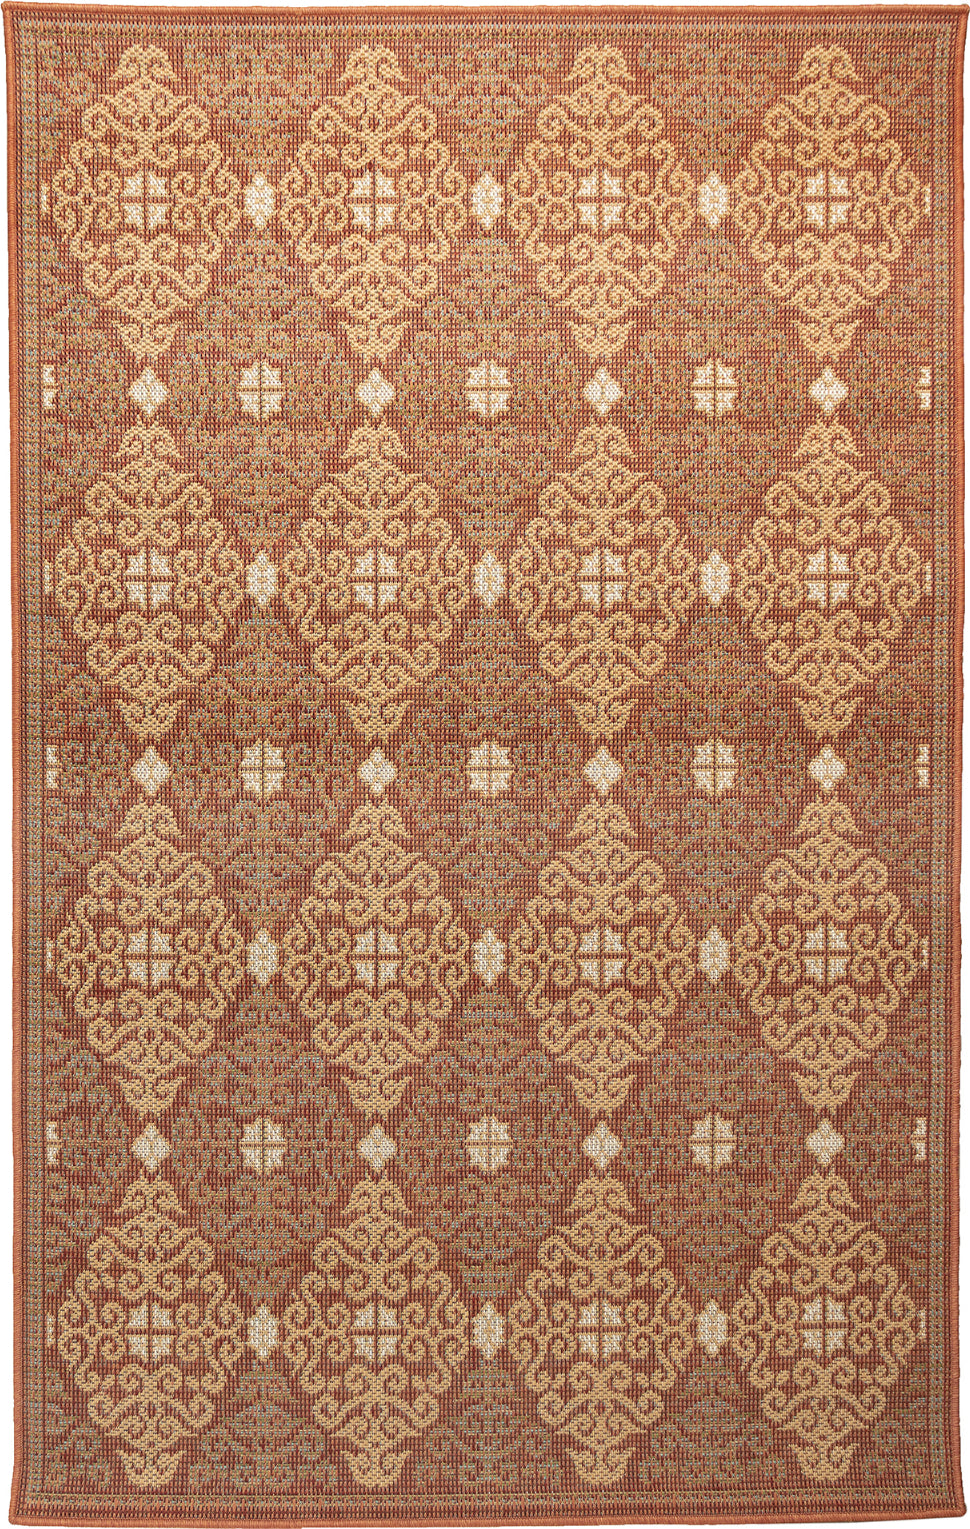 Trans Ocean Patio 6064/24 Suzani Diamonds Red Area Rug by Liora Manne